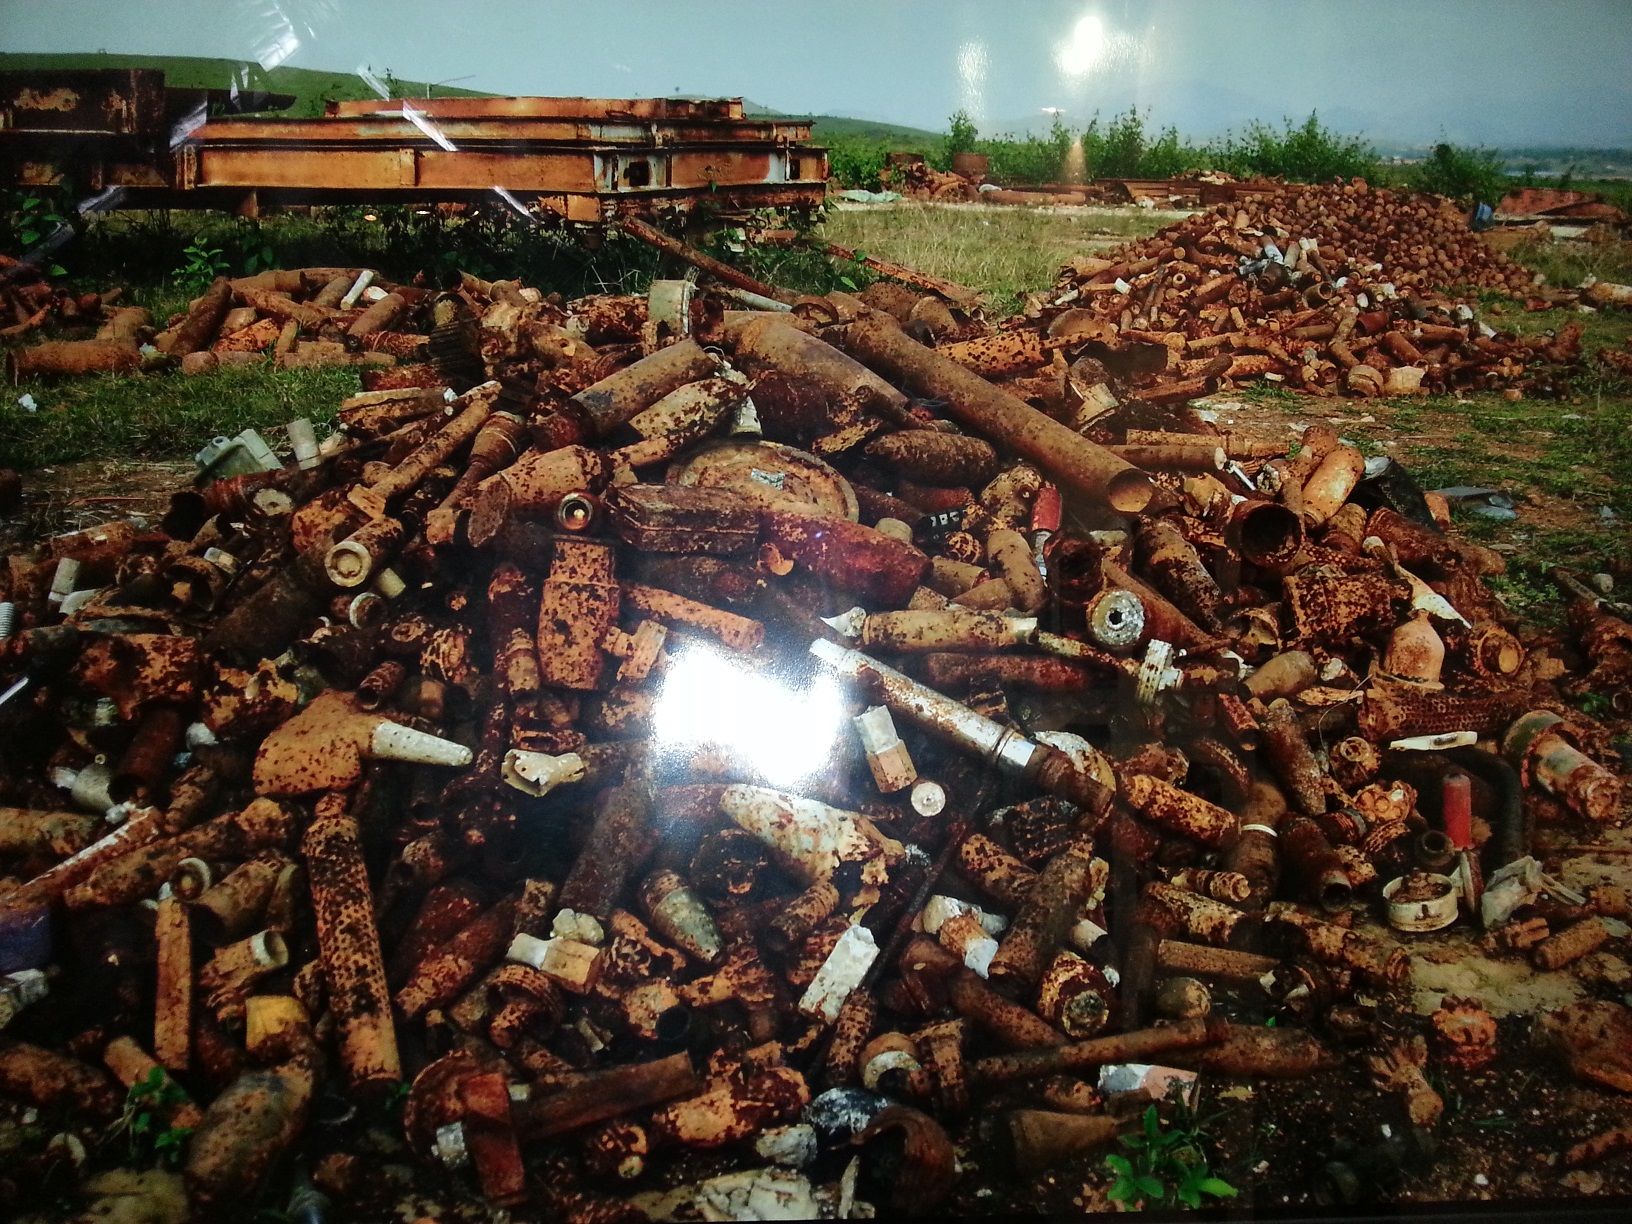 A photo showing the work of COPE clearing off UXO in Laos